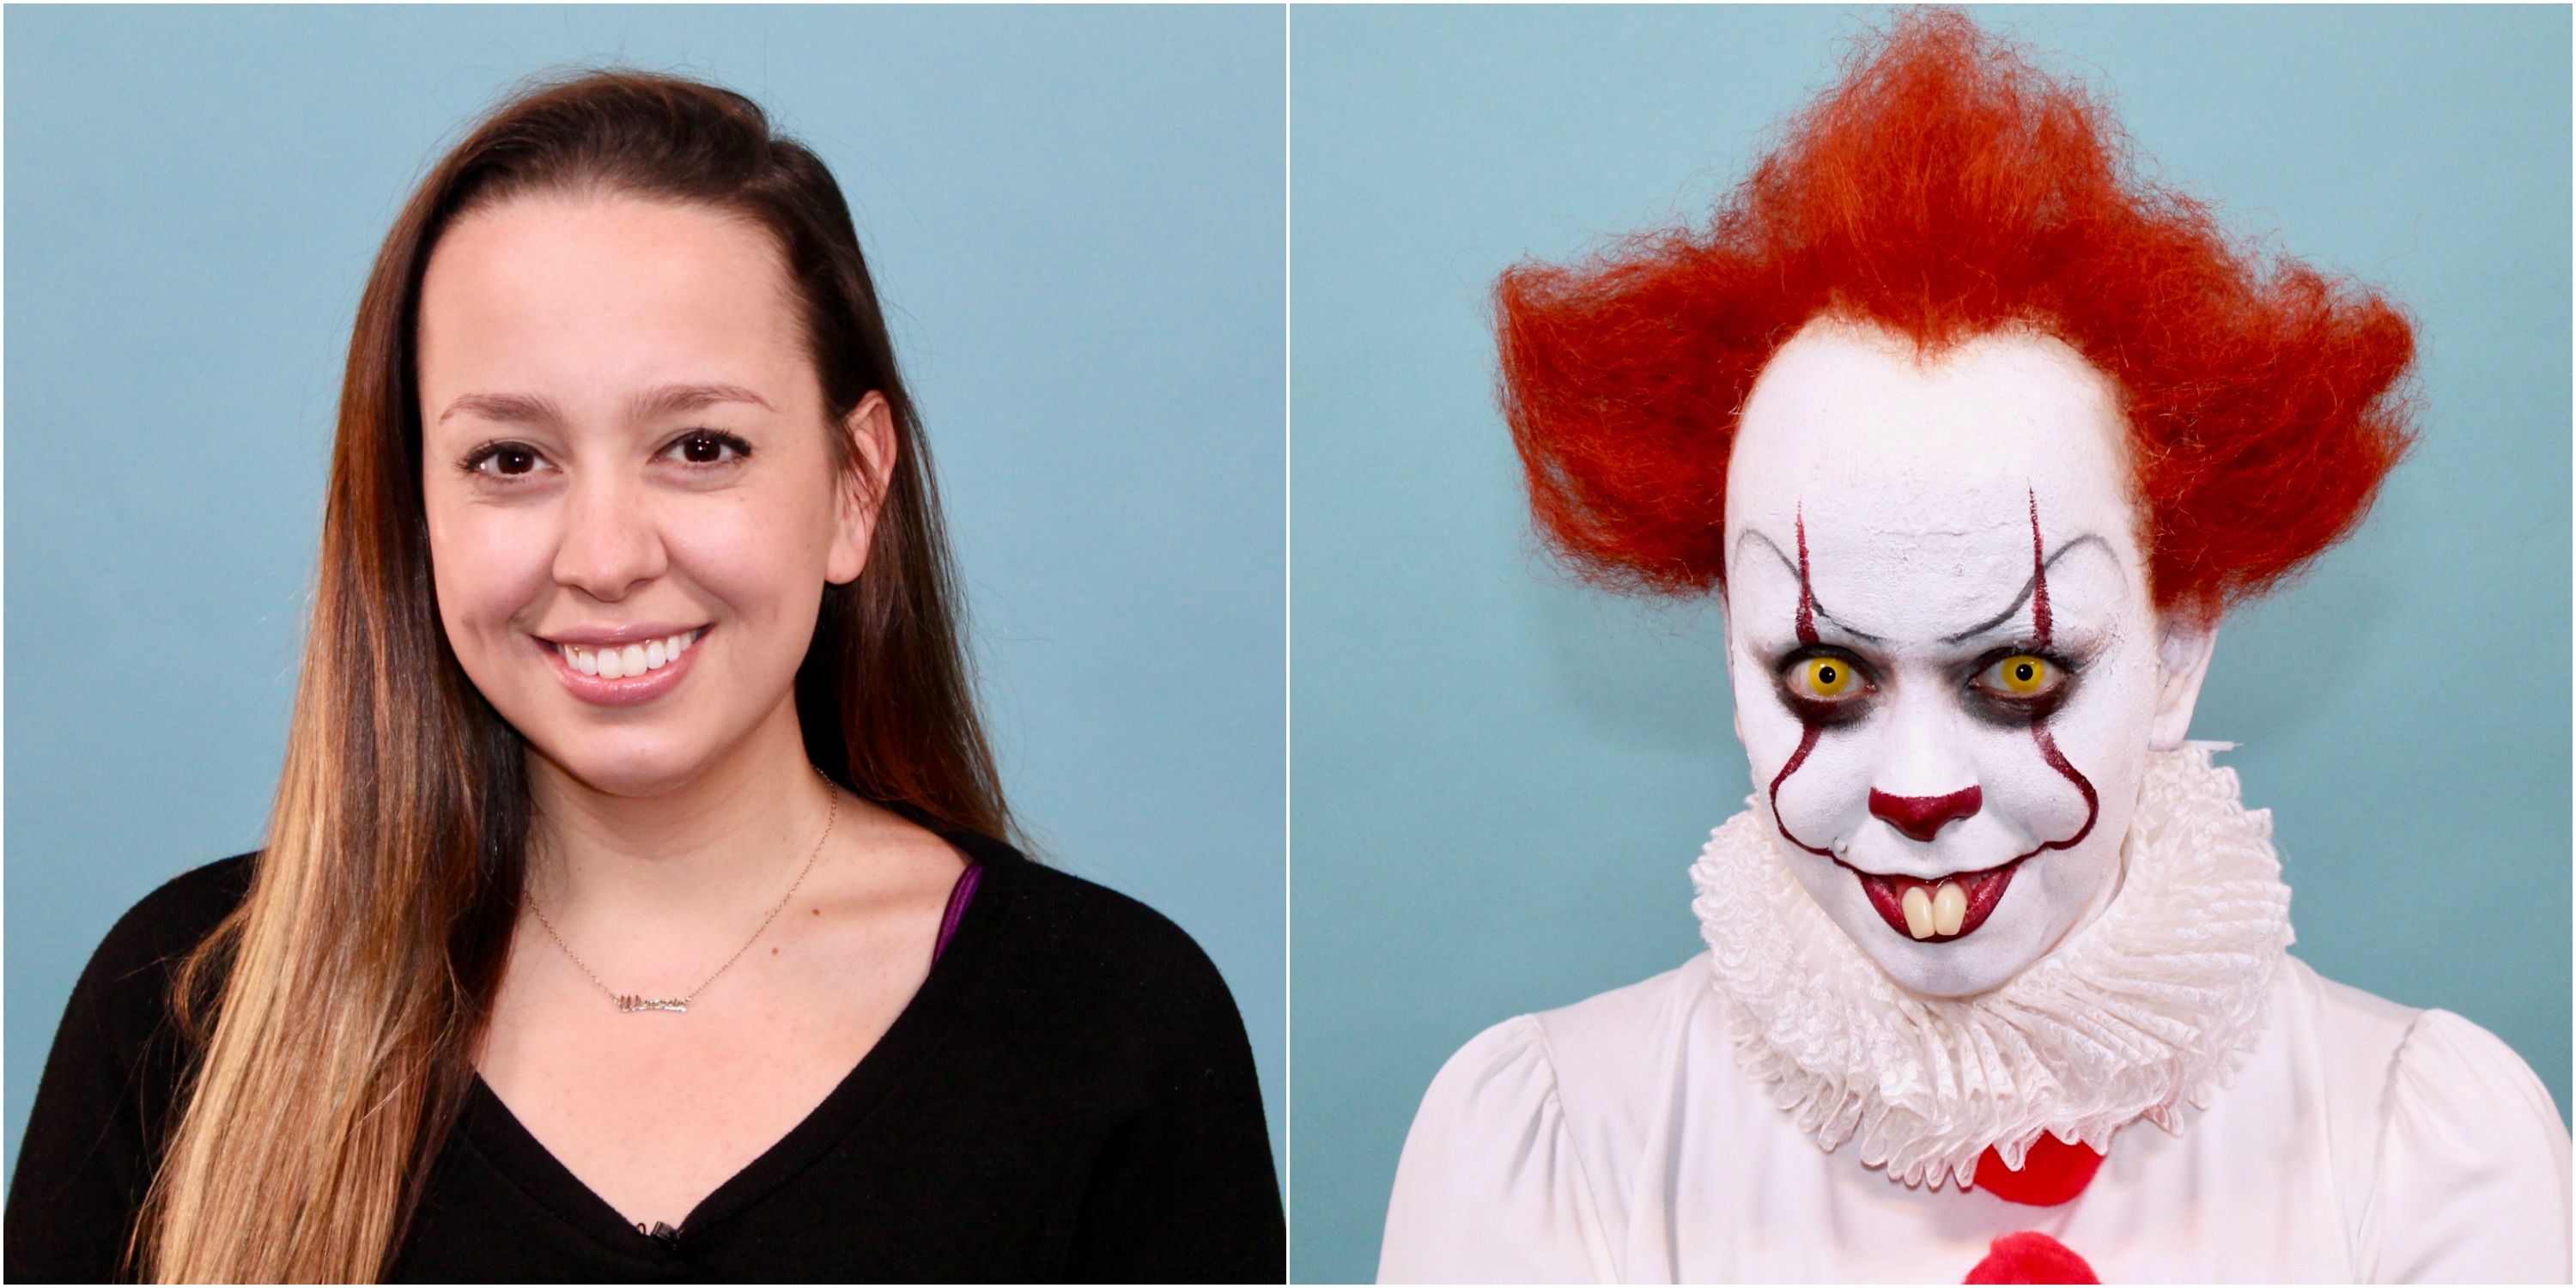 scary female clown makeup